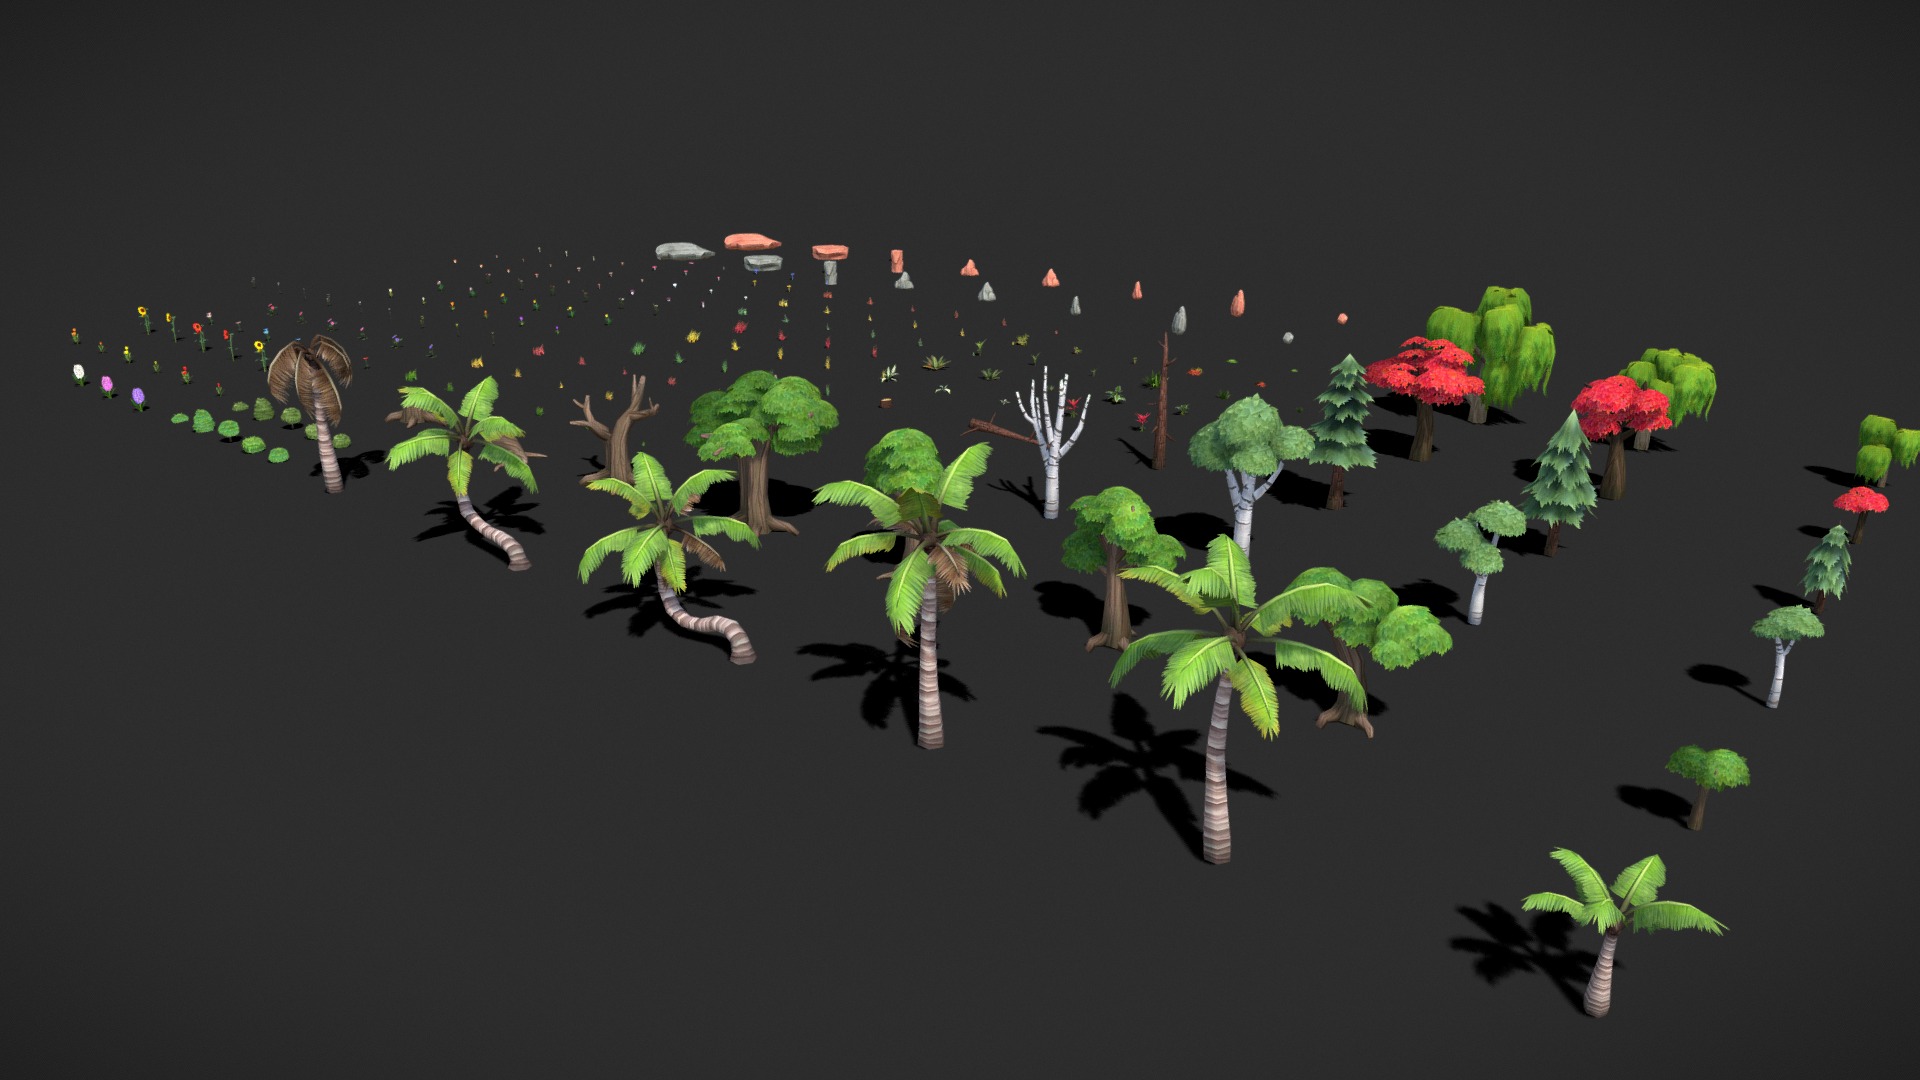 3D model Environment Asset Kit - This is a 3D model of the Environment Asset Kit. The 3D model is about a group of plants and flowers.